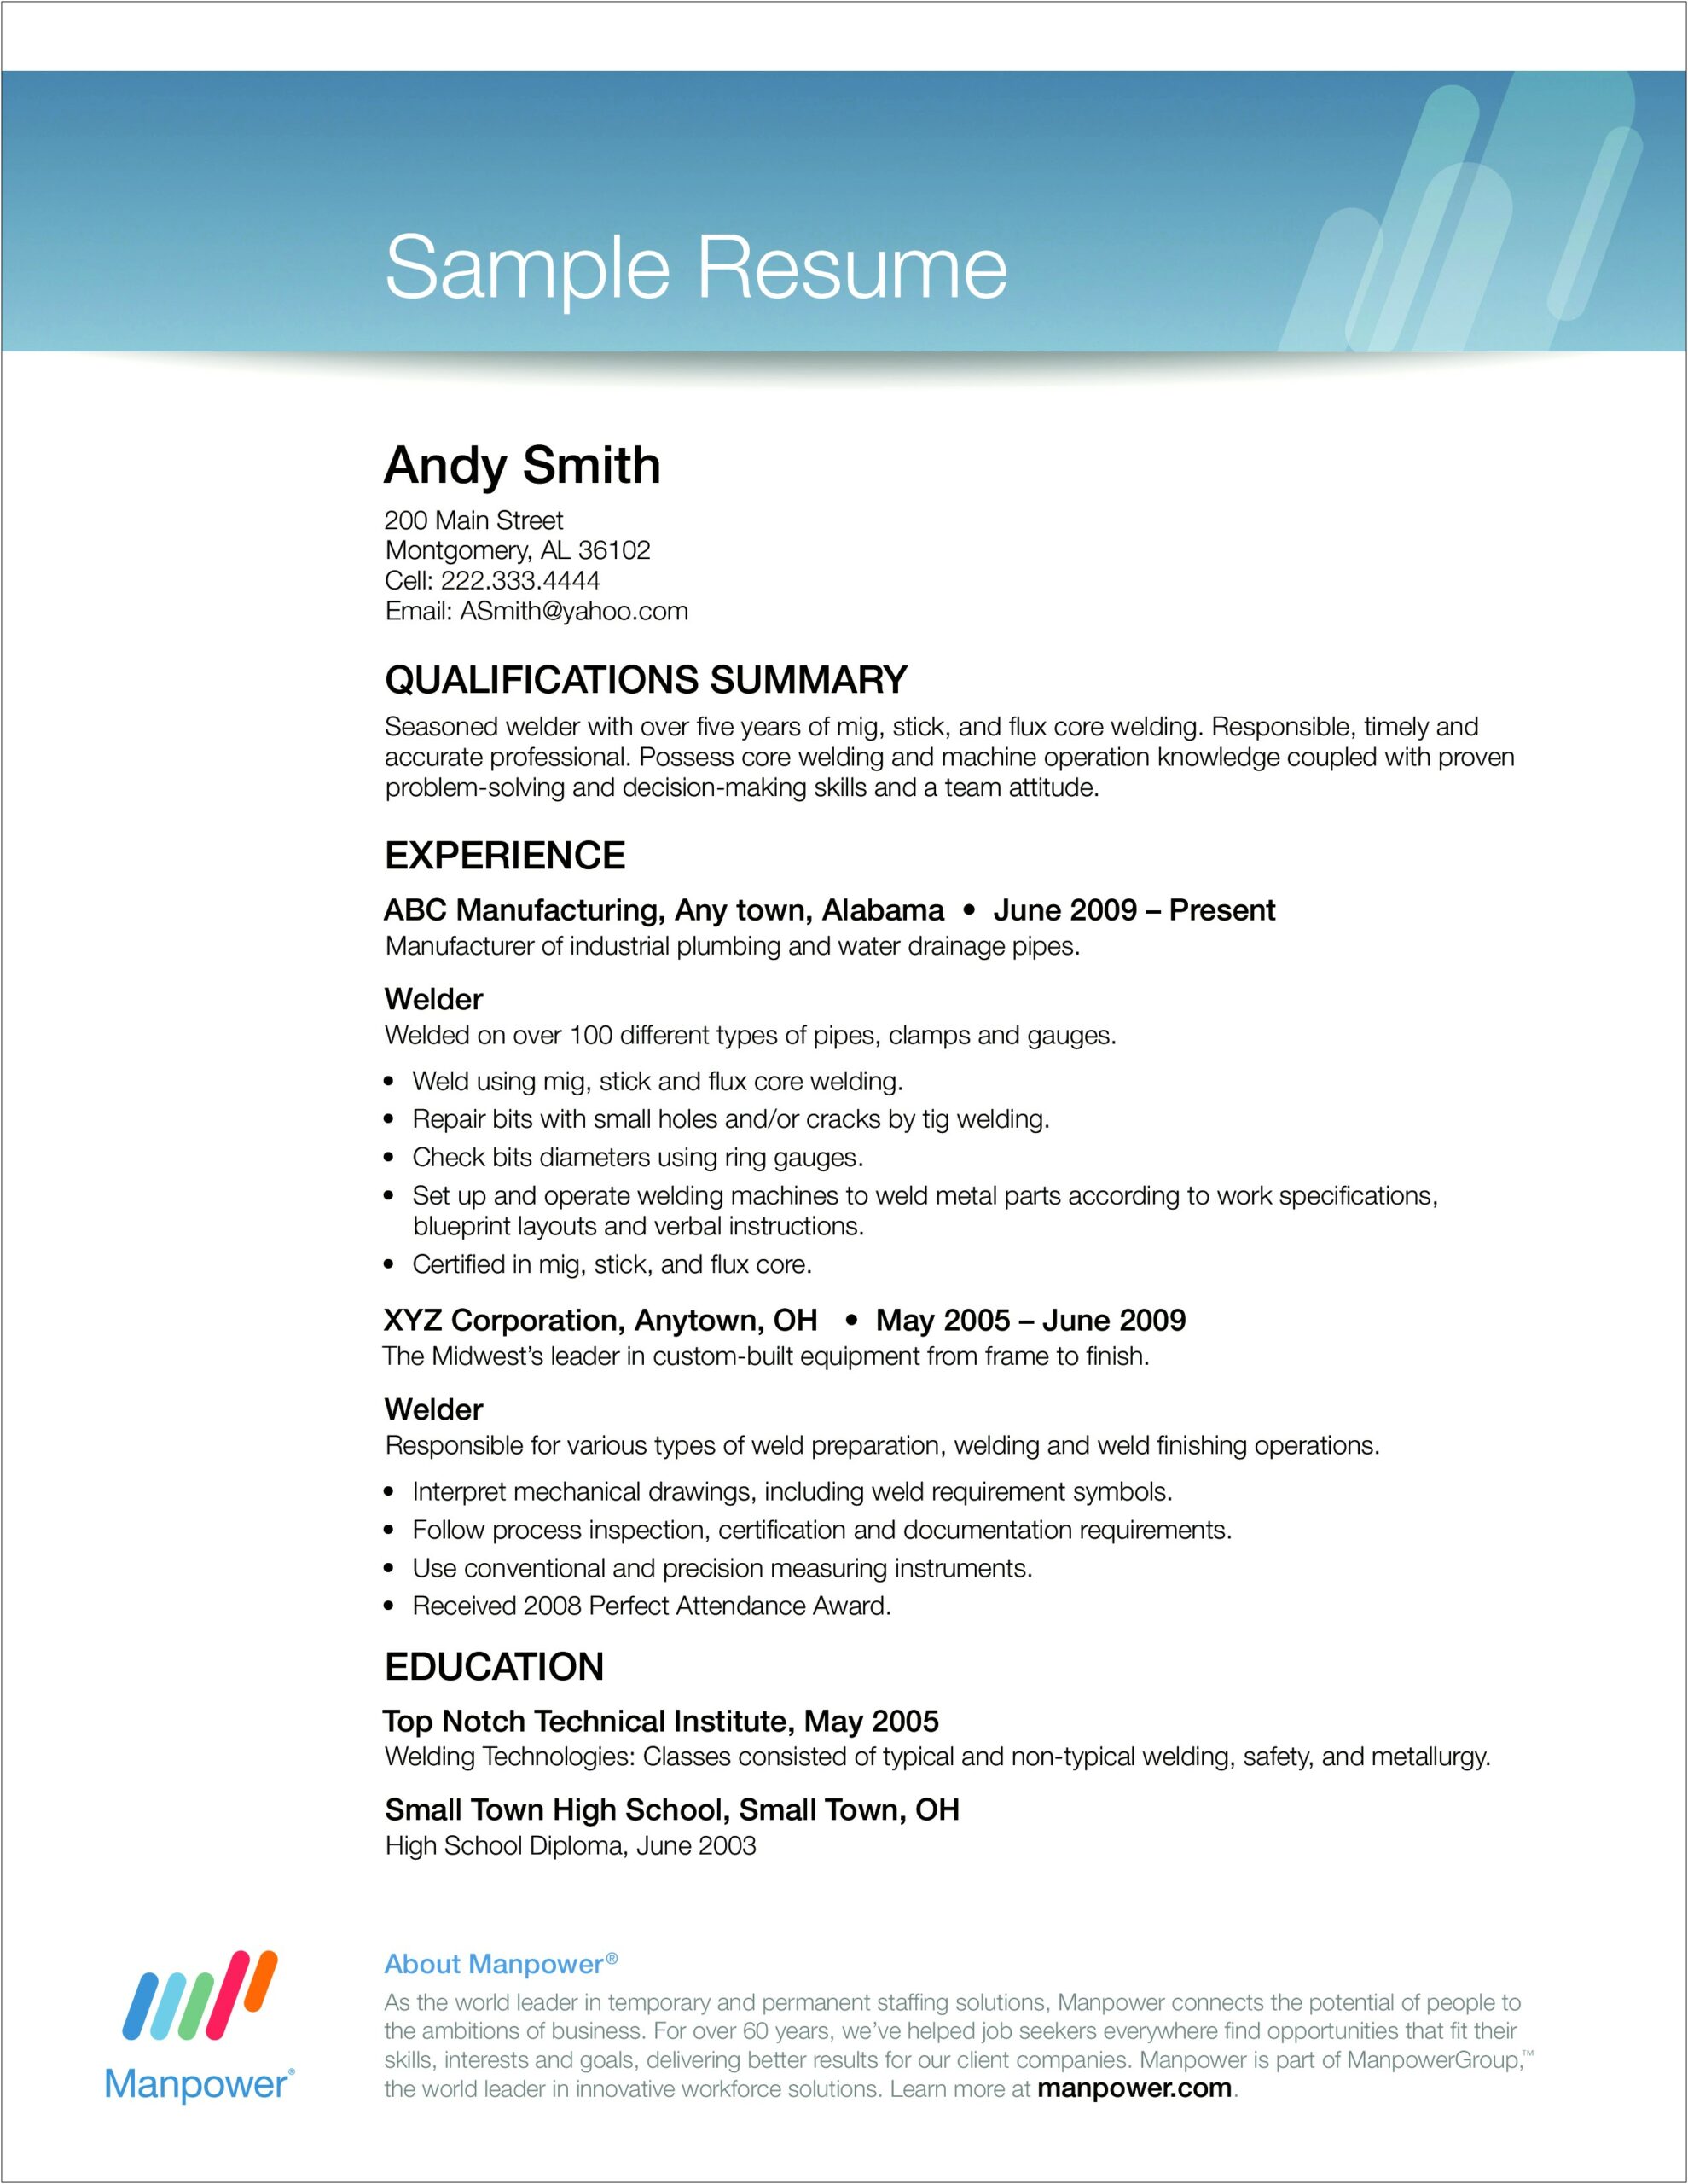 Prepare A Resume For A Job Interview